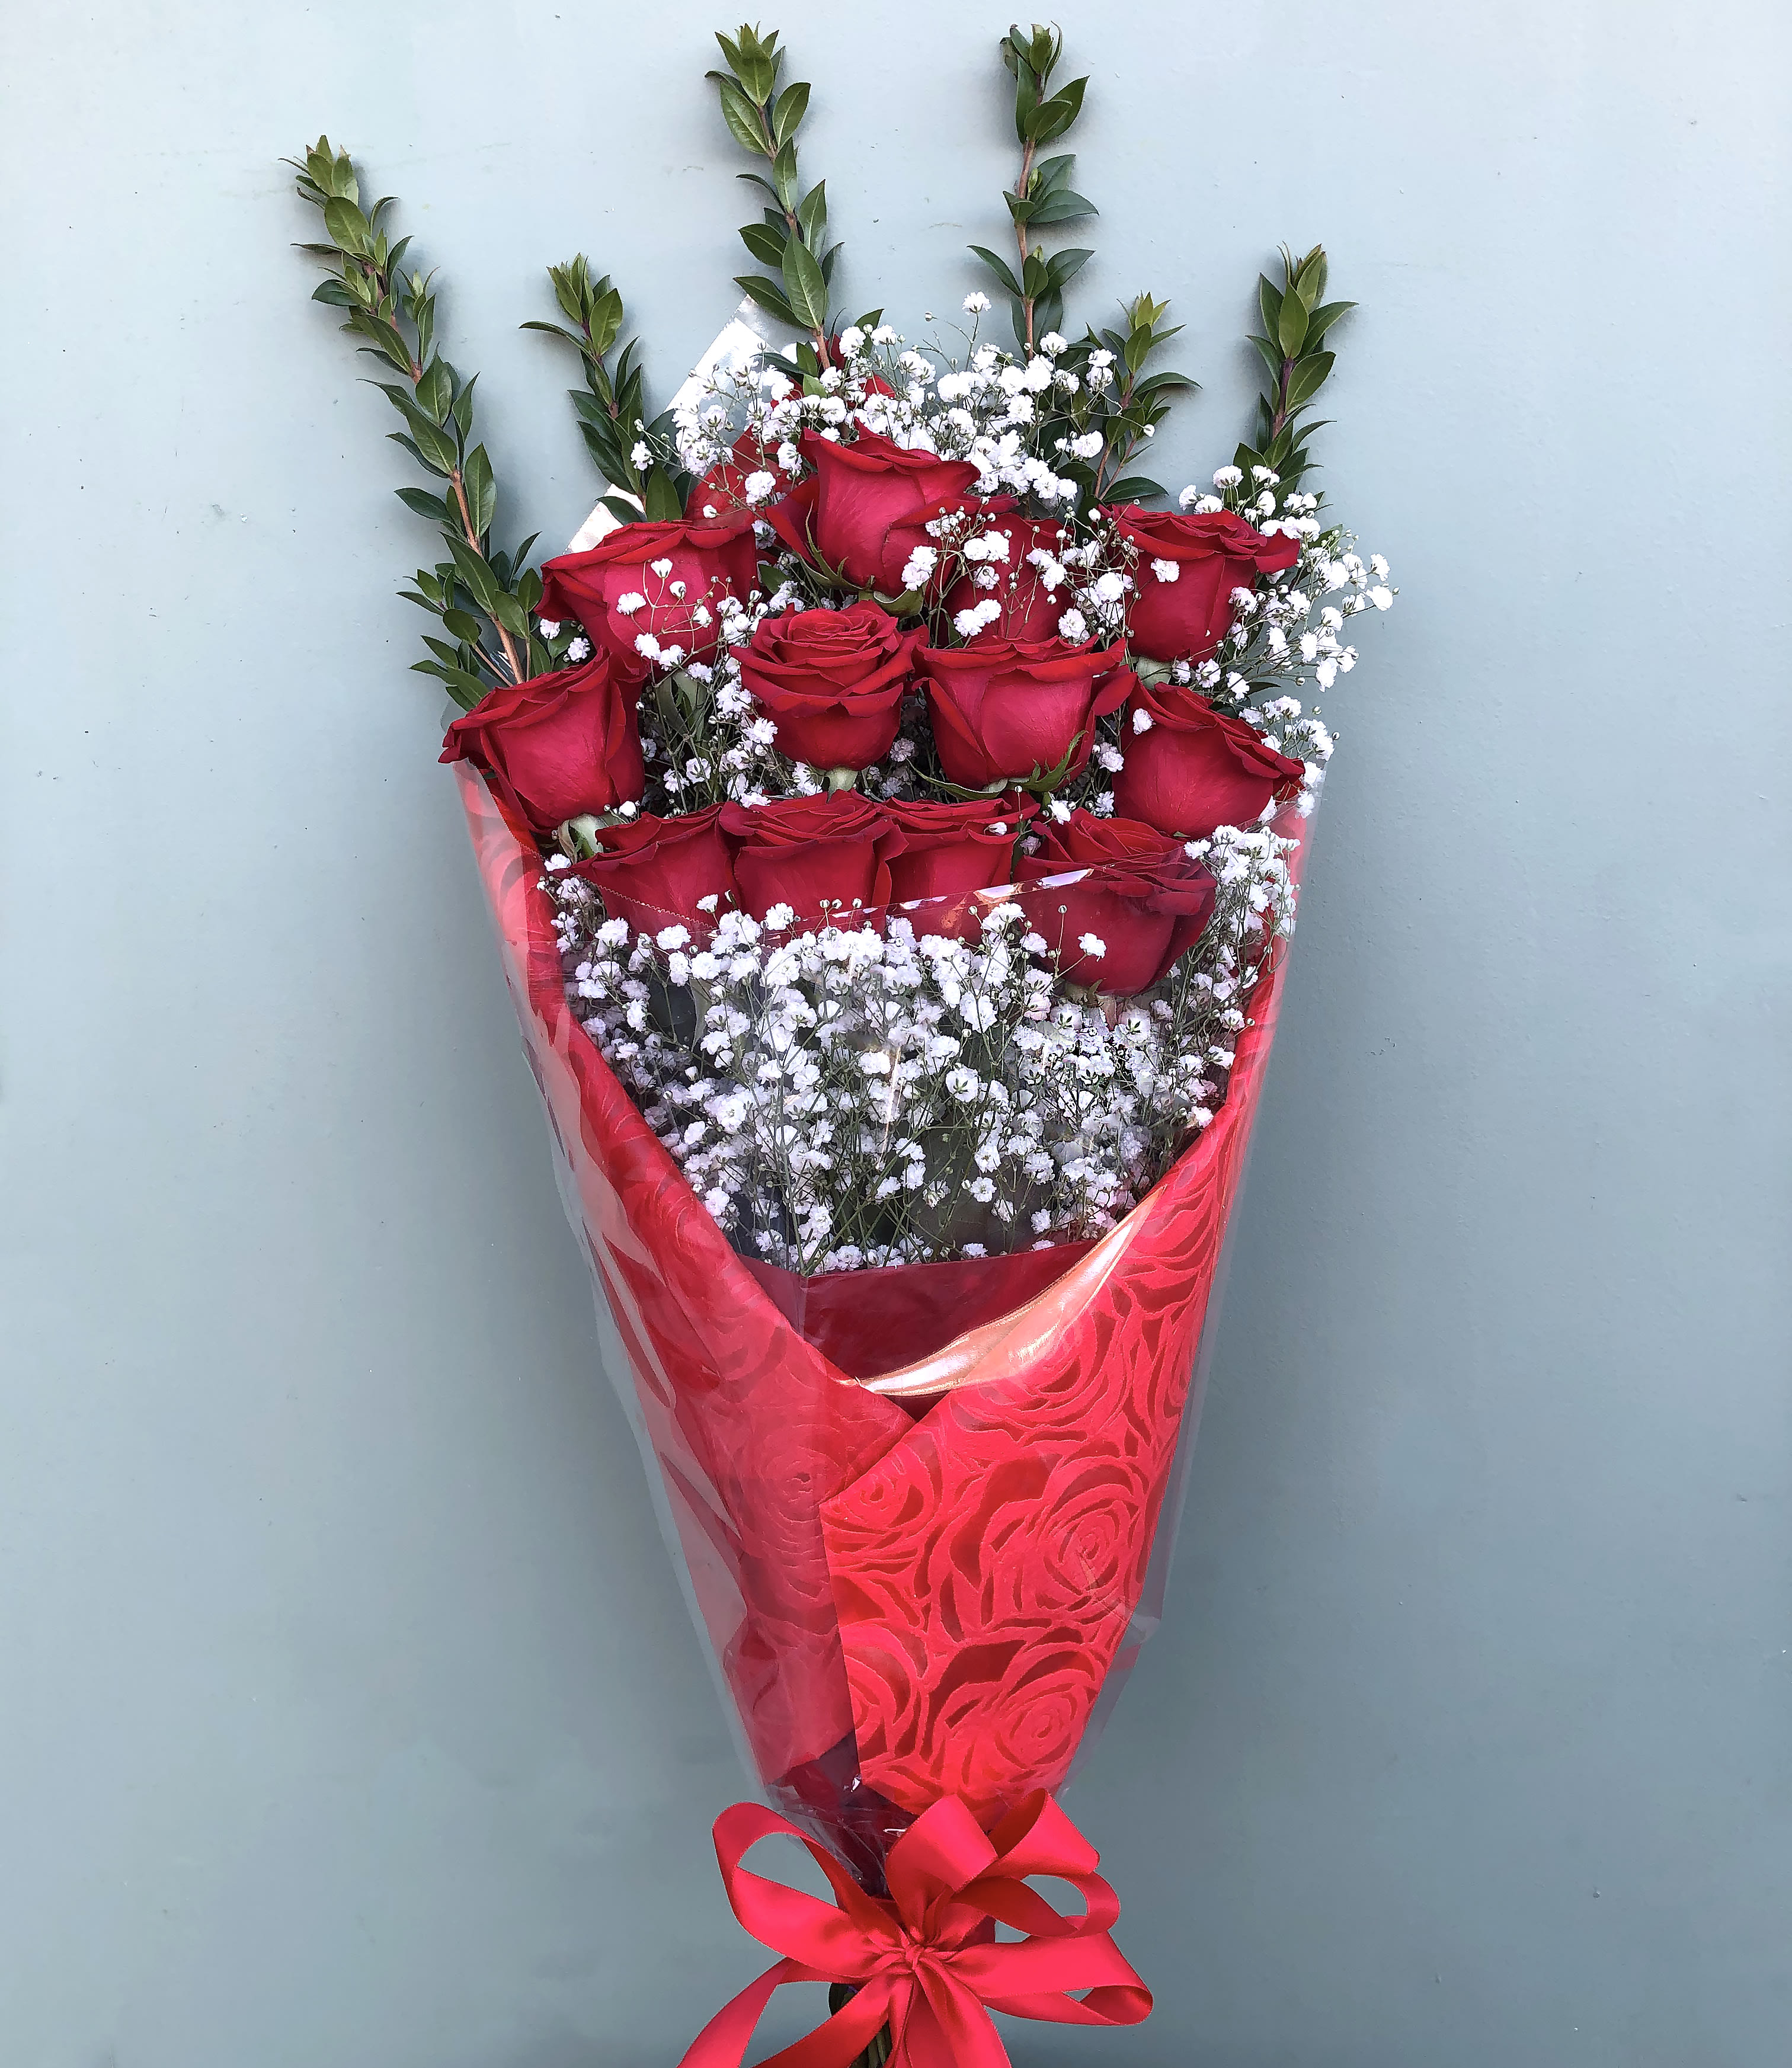 red roses bouquet: send and deliver Roses to United States of America